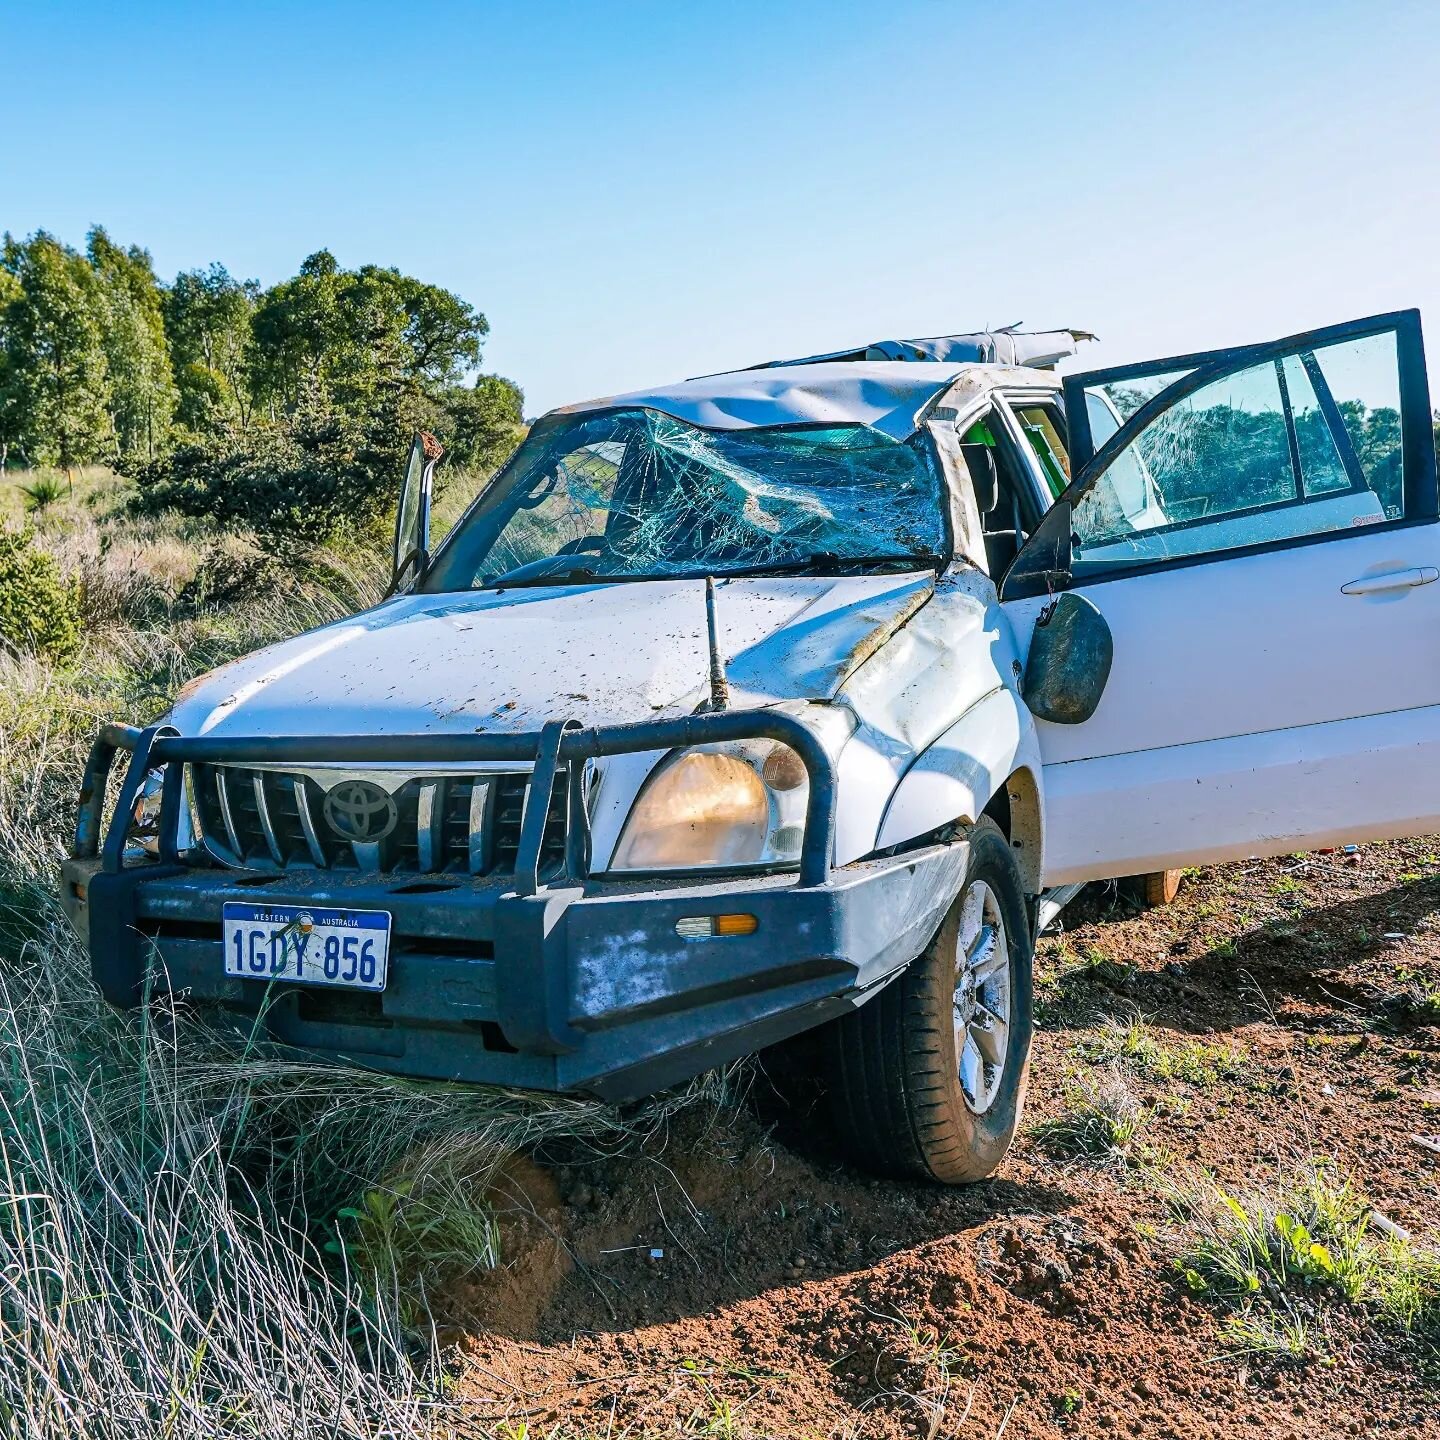 🧔 A massive thank you to @toyota_aus for quite literally saving our lives. We were heading north for our next adventure and tragedy struck. A combination of road factors winding up in a double rollover...and we walked away without a scratch. I'm cer